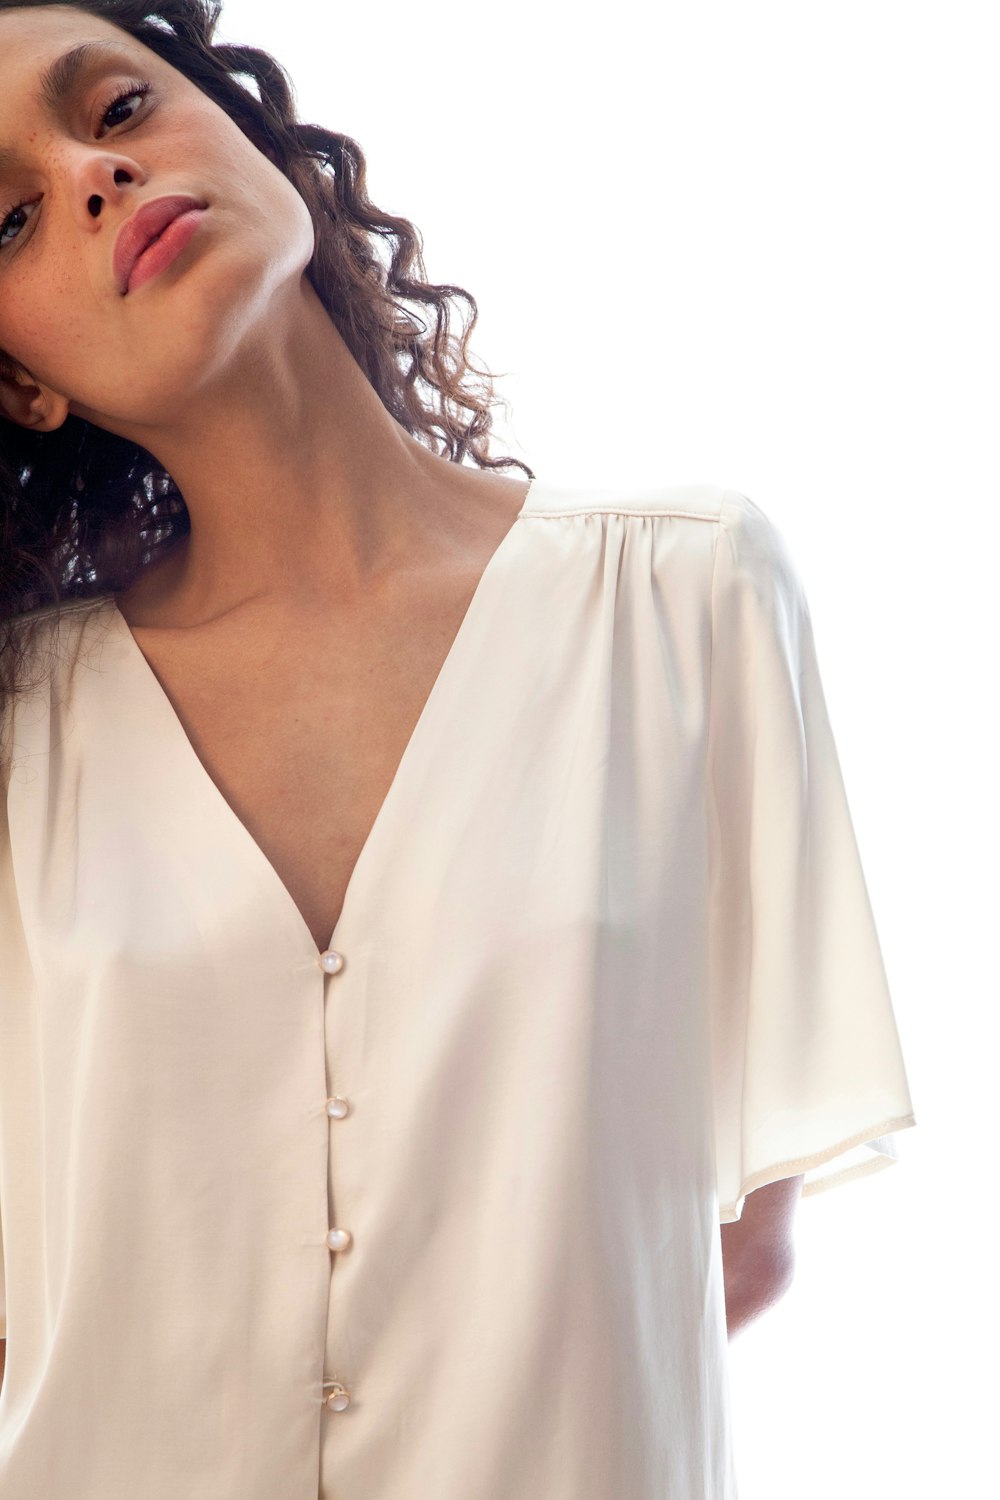 a woman with curly hair wearing a white blouse